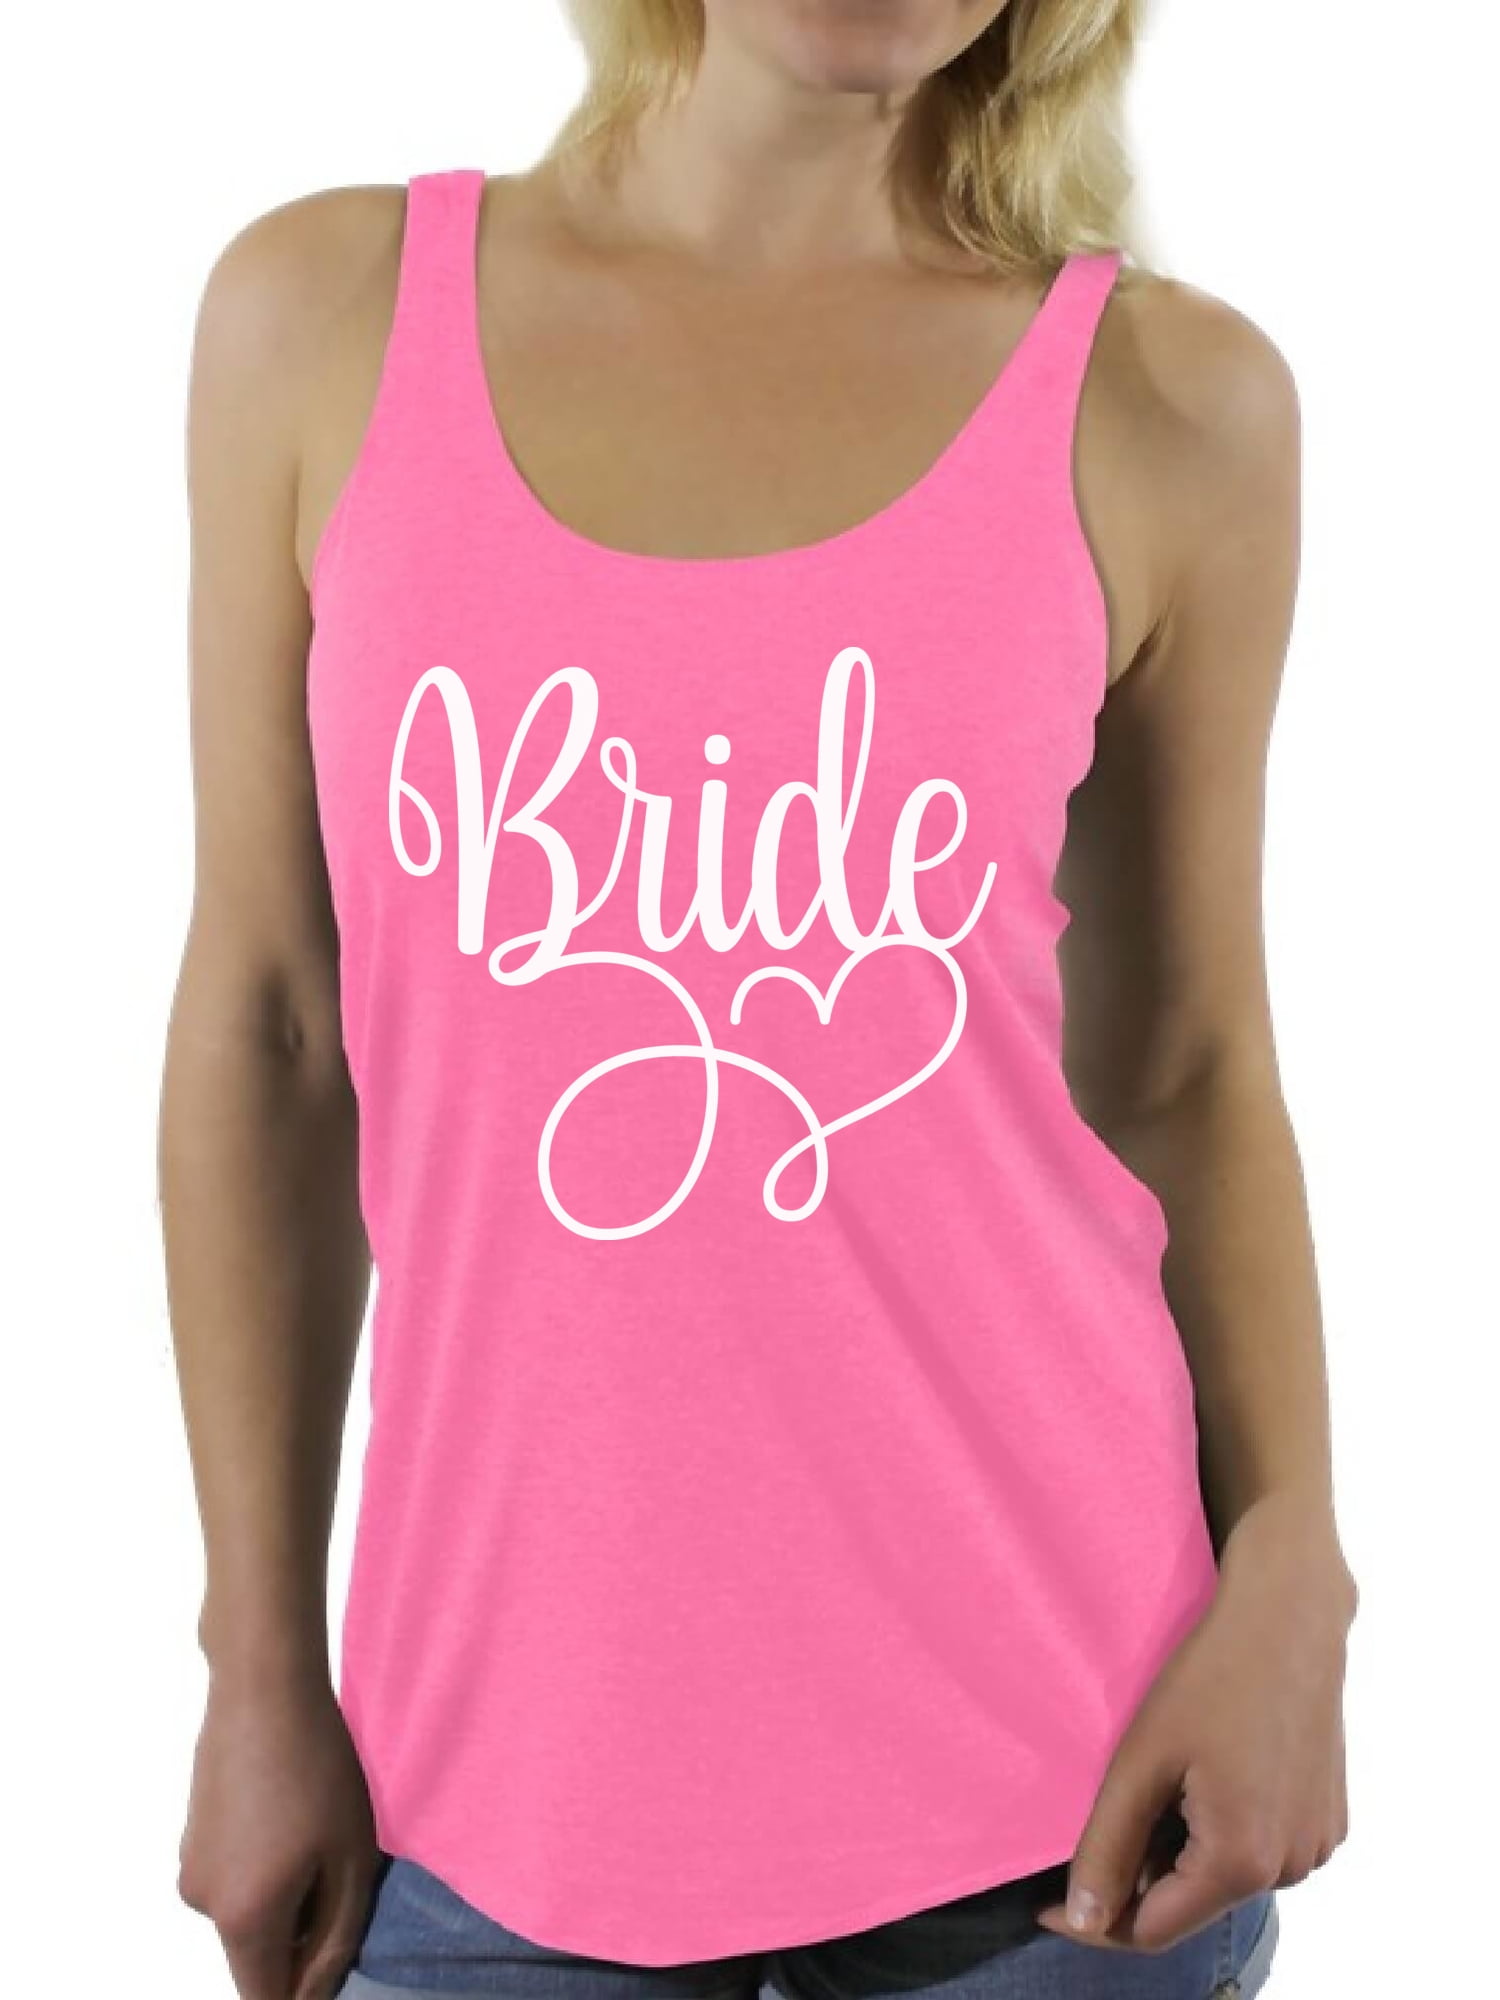 Bride's Babes Muscle Tank